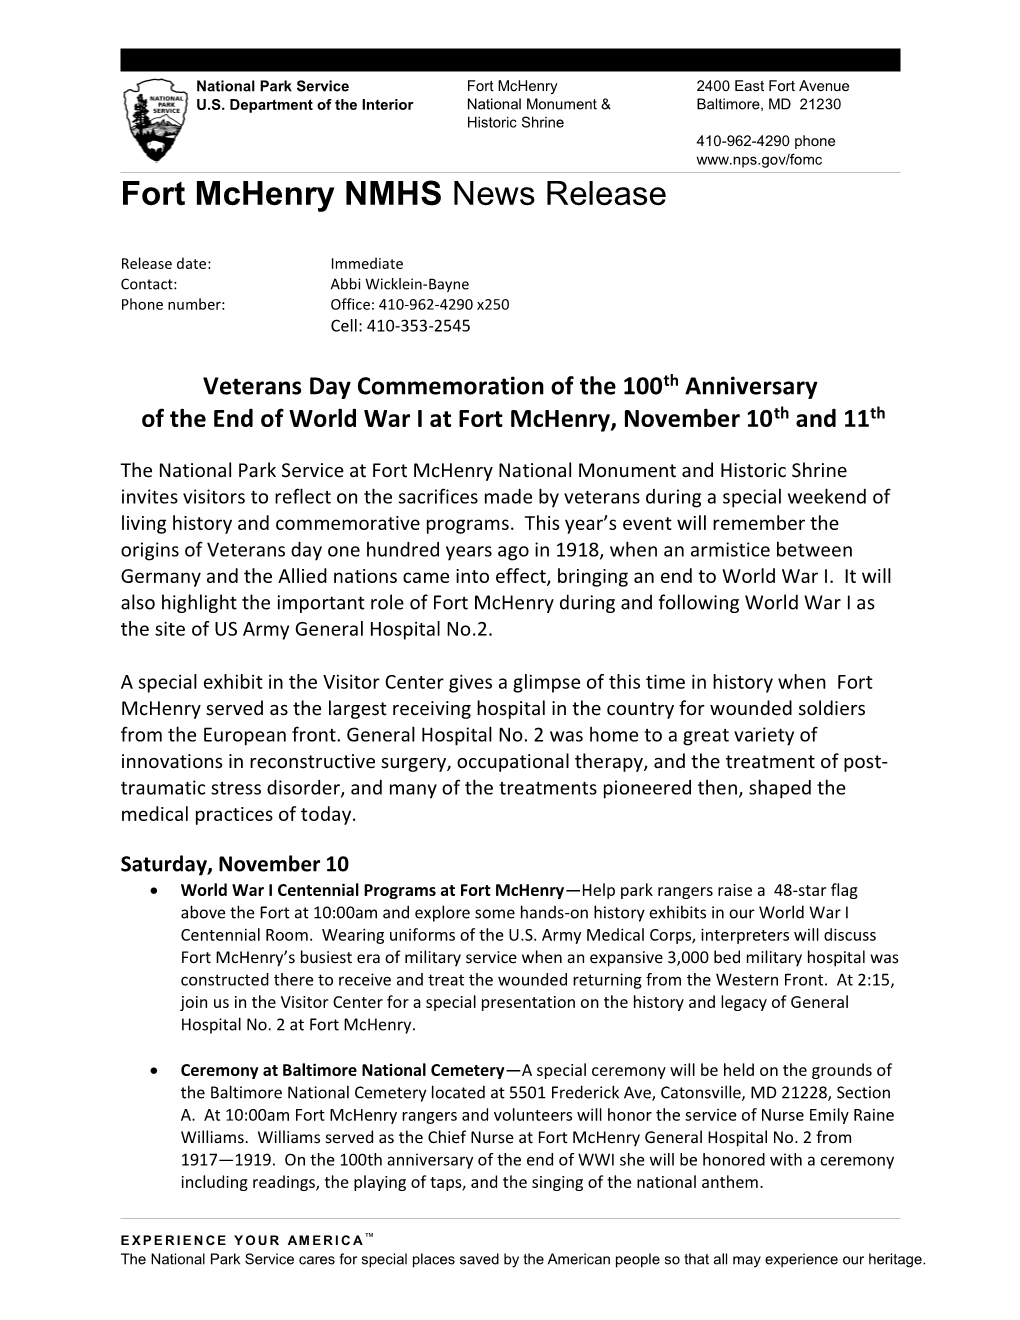 Fort Mchenry NMHS News Release